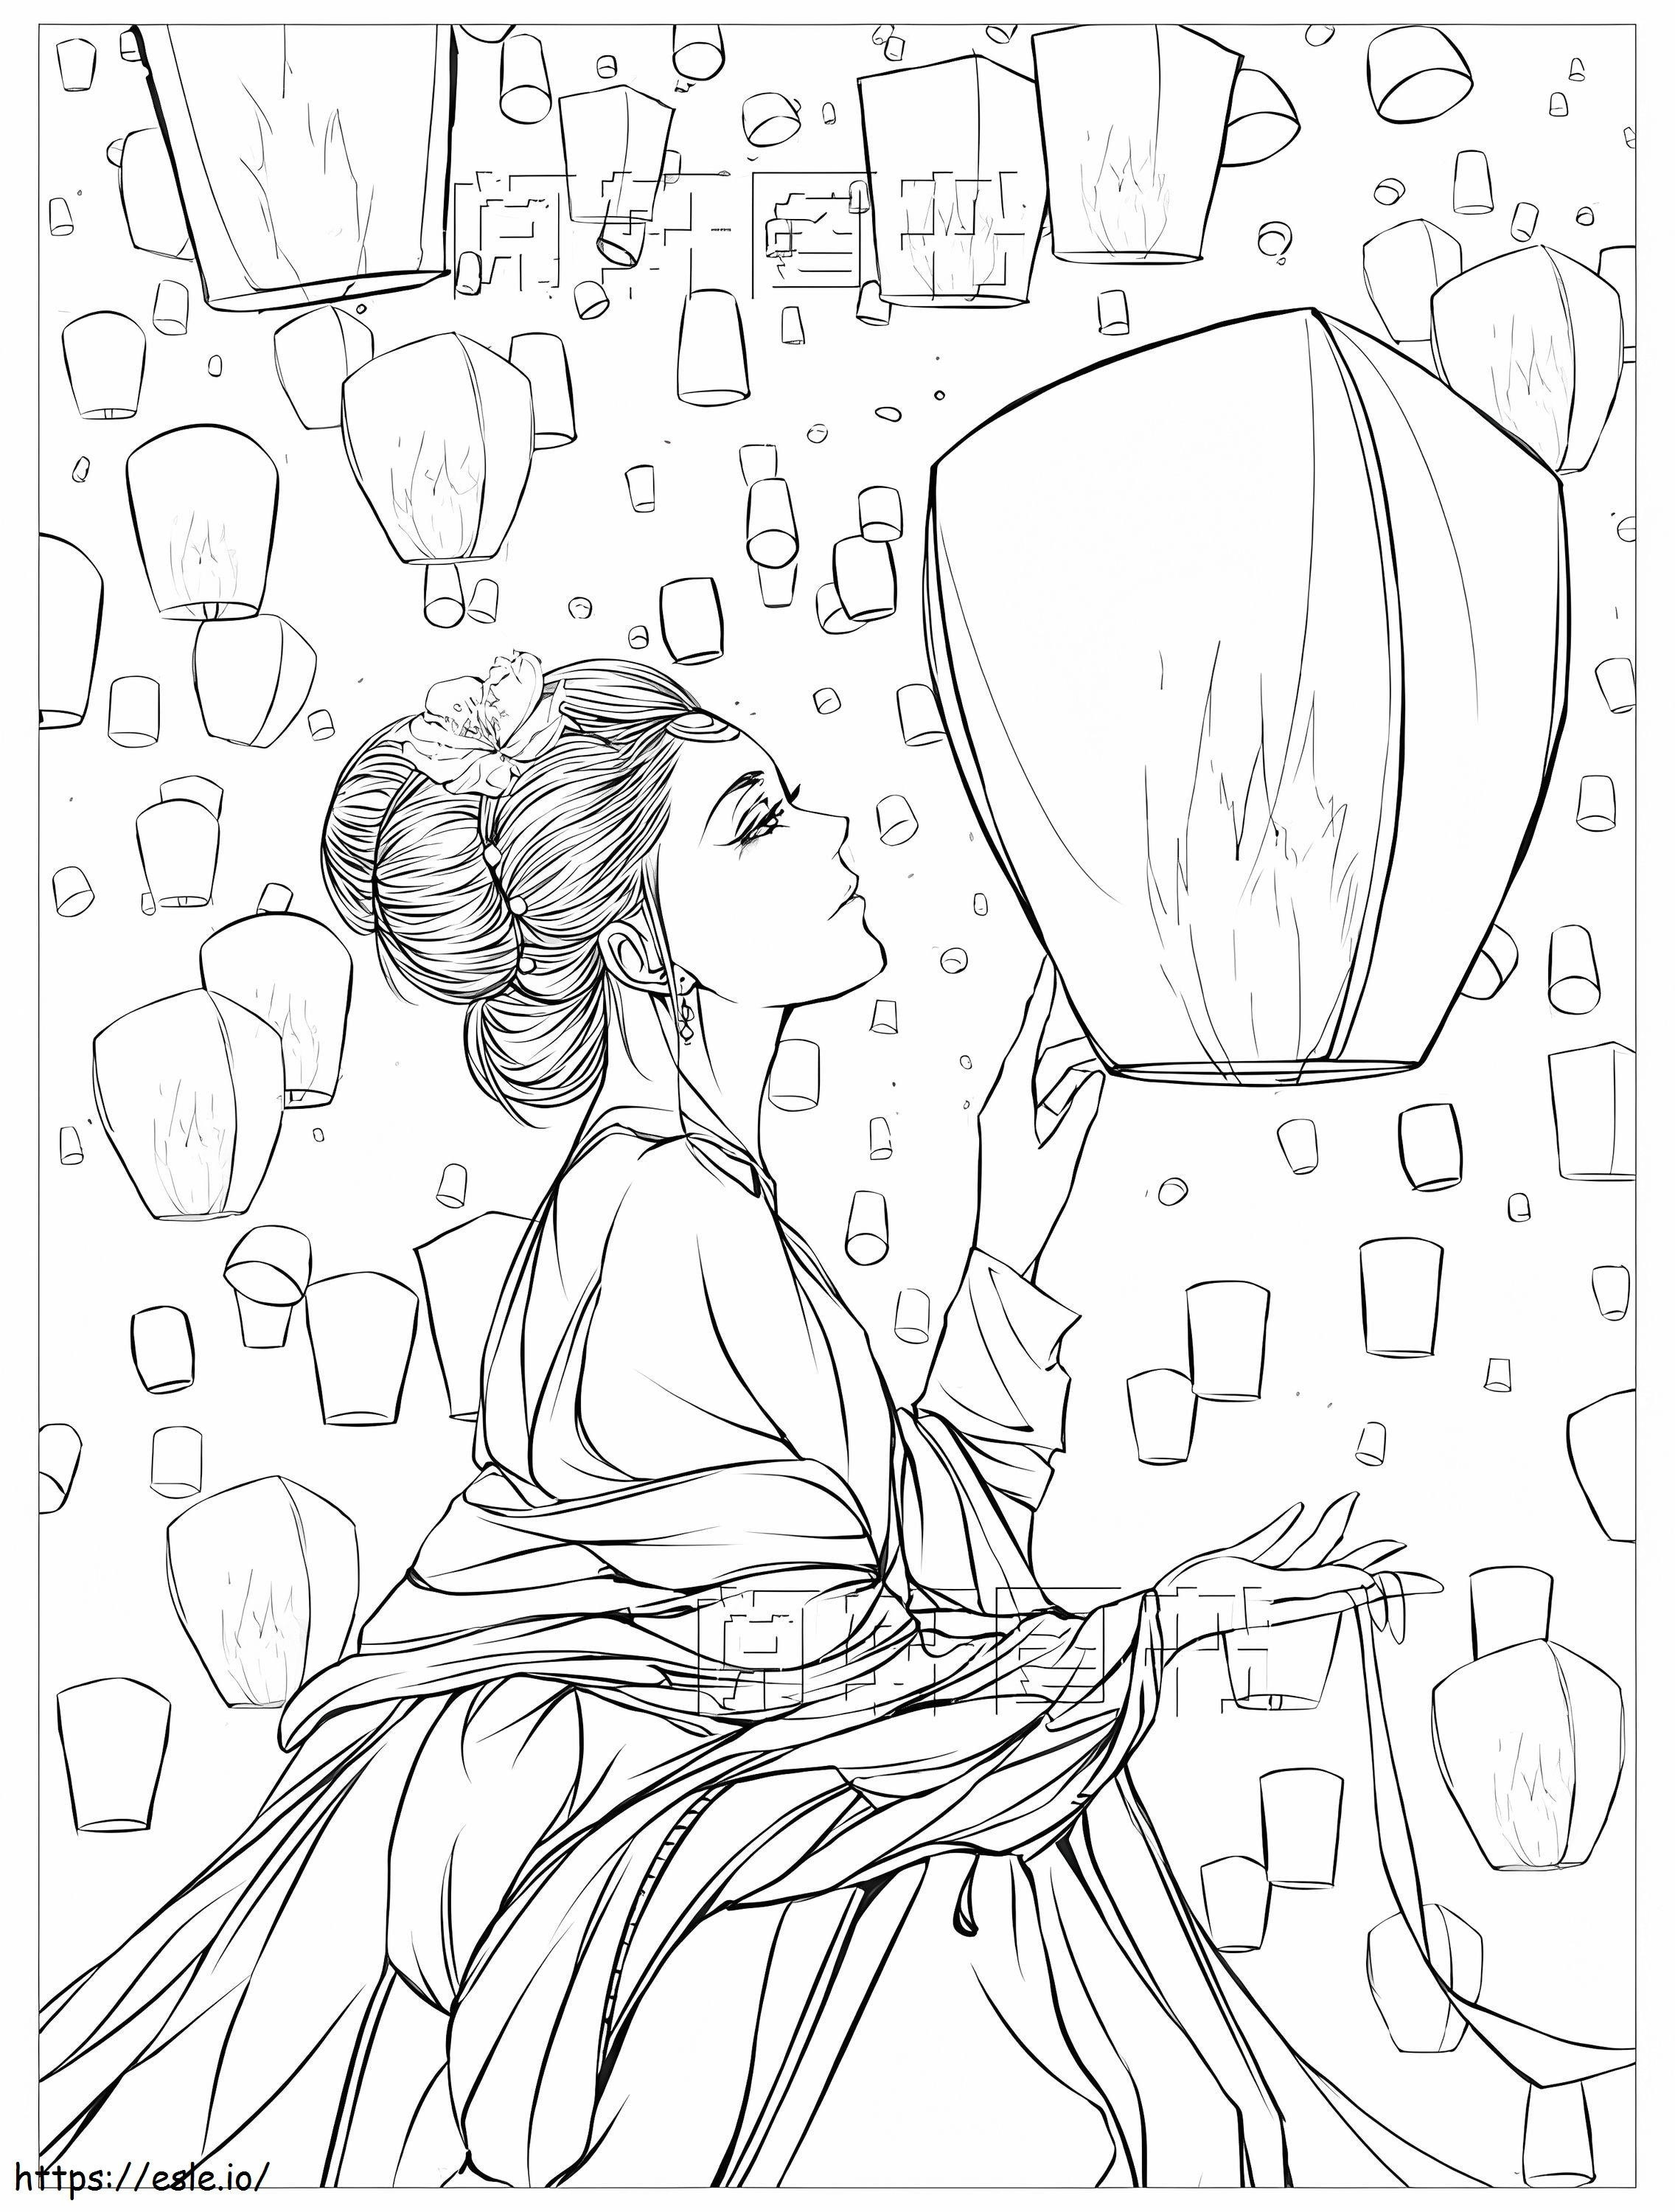 Aesthetic Girl And Lanterns coloring page